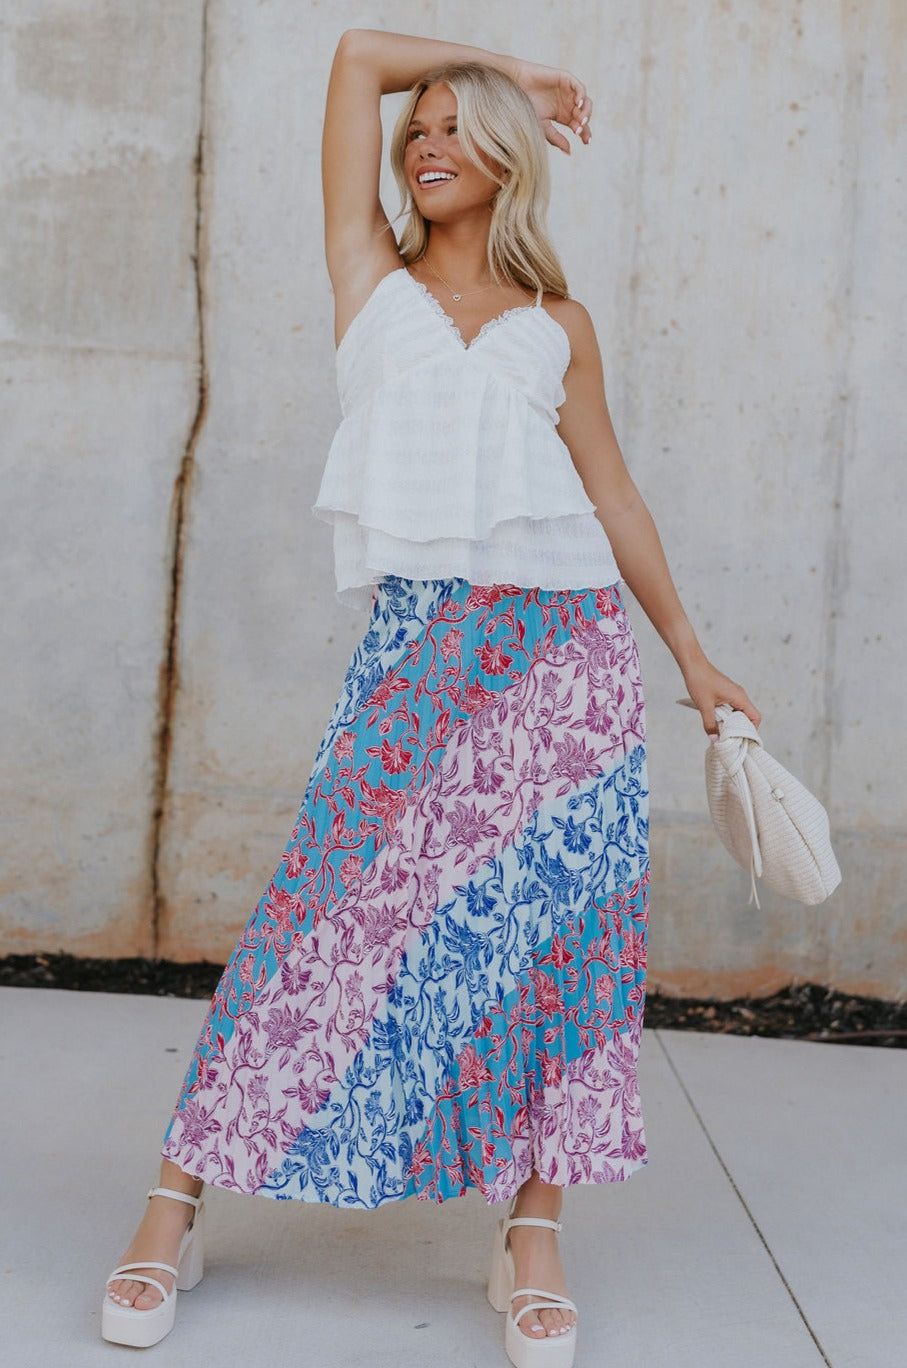 Full body view of female model wearing the Lily Aqua & Pink Multi Pleated Maxi Skirt which features Blue, Pink, Red, Purple and Aqua Floral Print, Satin Pleated Fabric, Maxi Length, Light Blue Lining and Side Zipper with Hook Closure